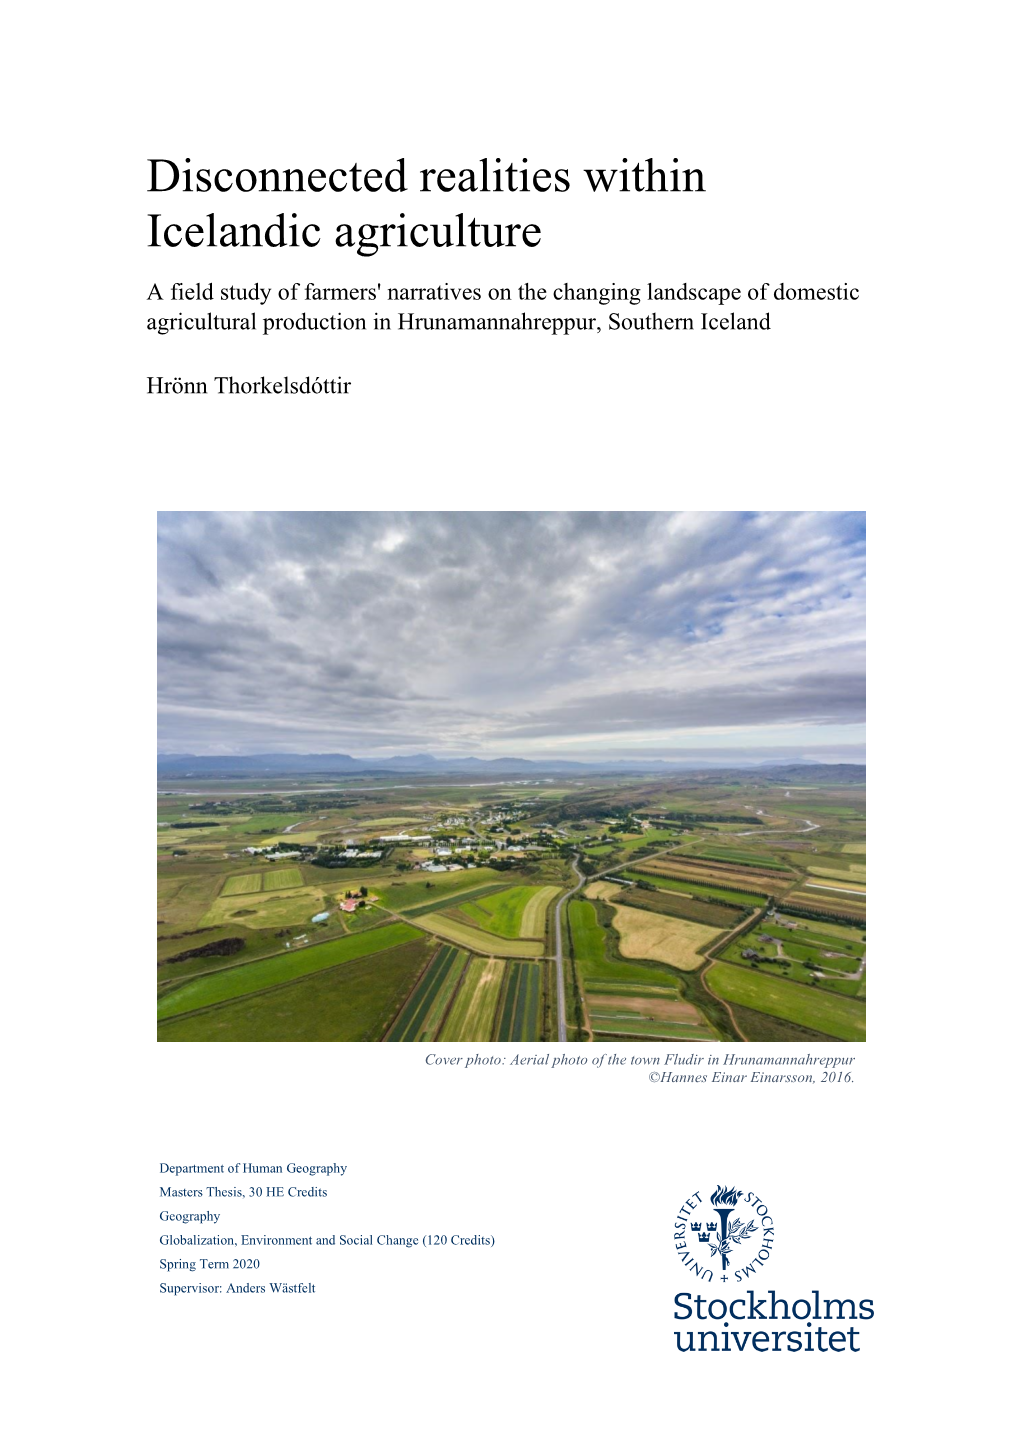 Disconnected Realities Within Icelandic Agriculture